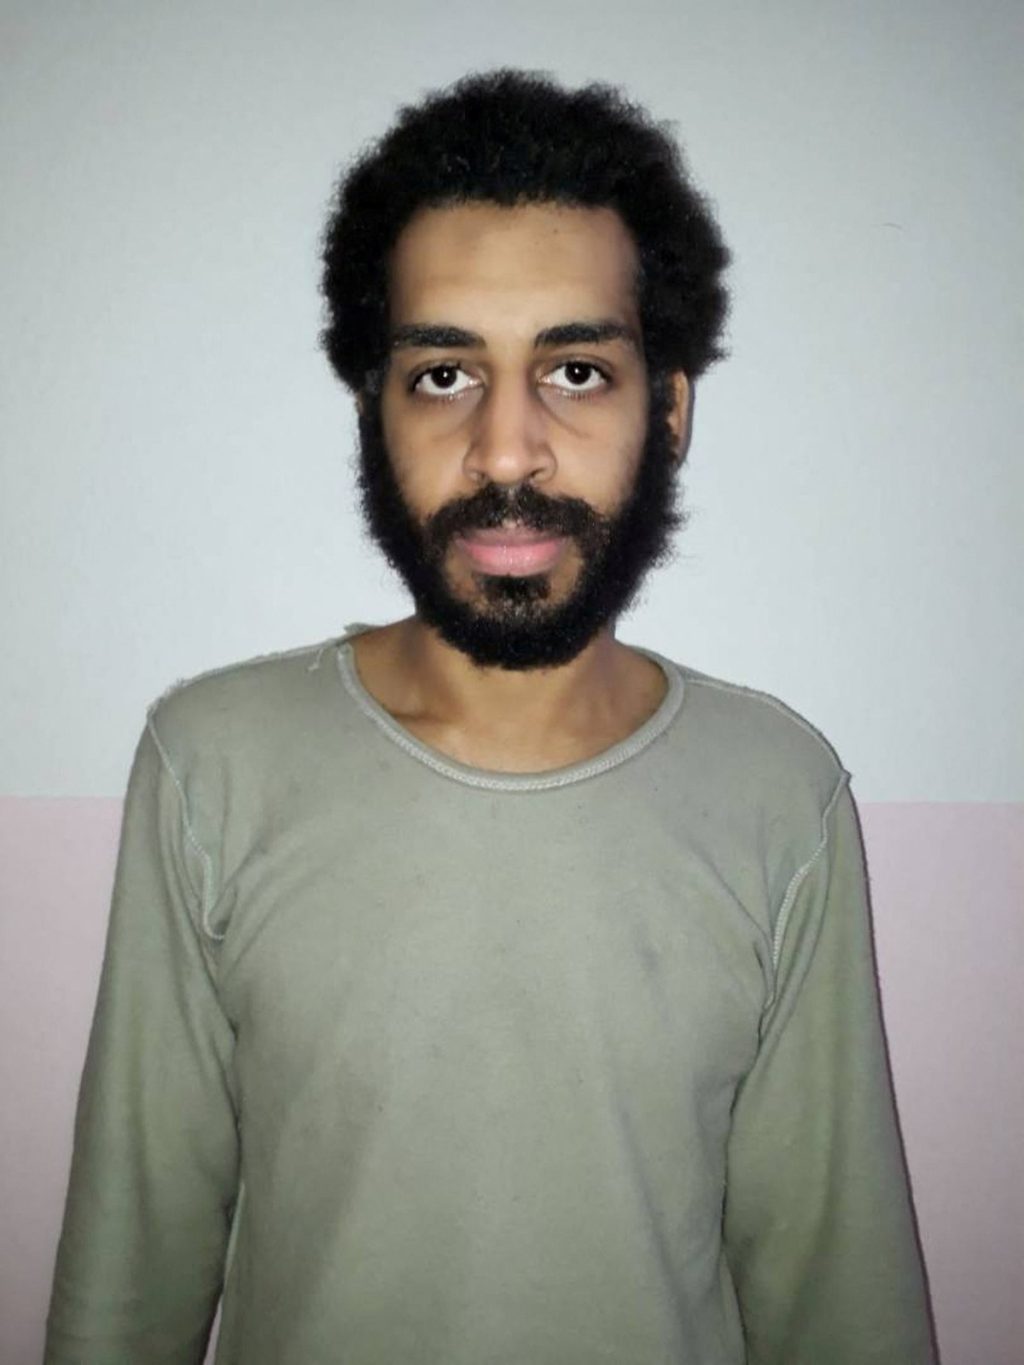 Alexanda Kotey, one of the "Beatles" of the Islamic State, is imprisoned for life in the United States |  Globalism